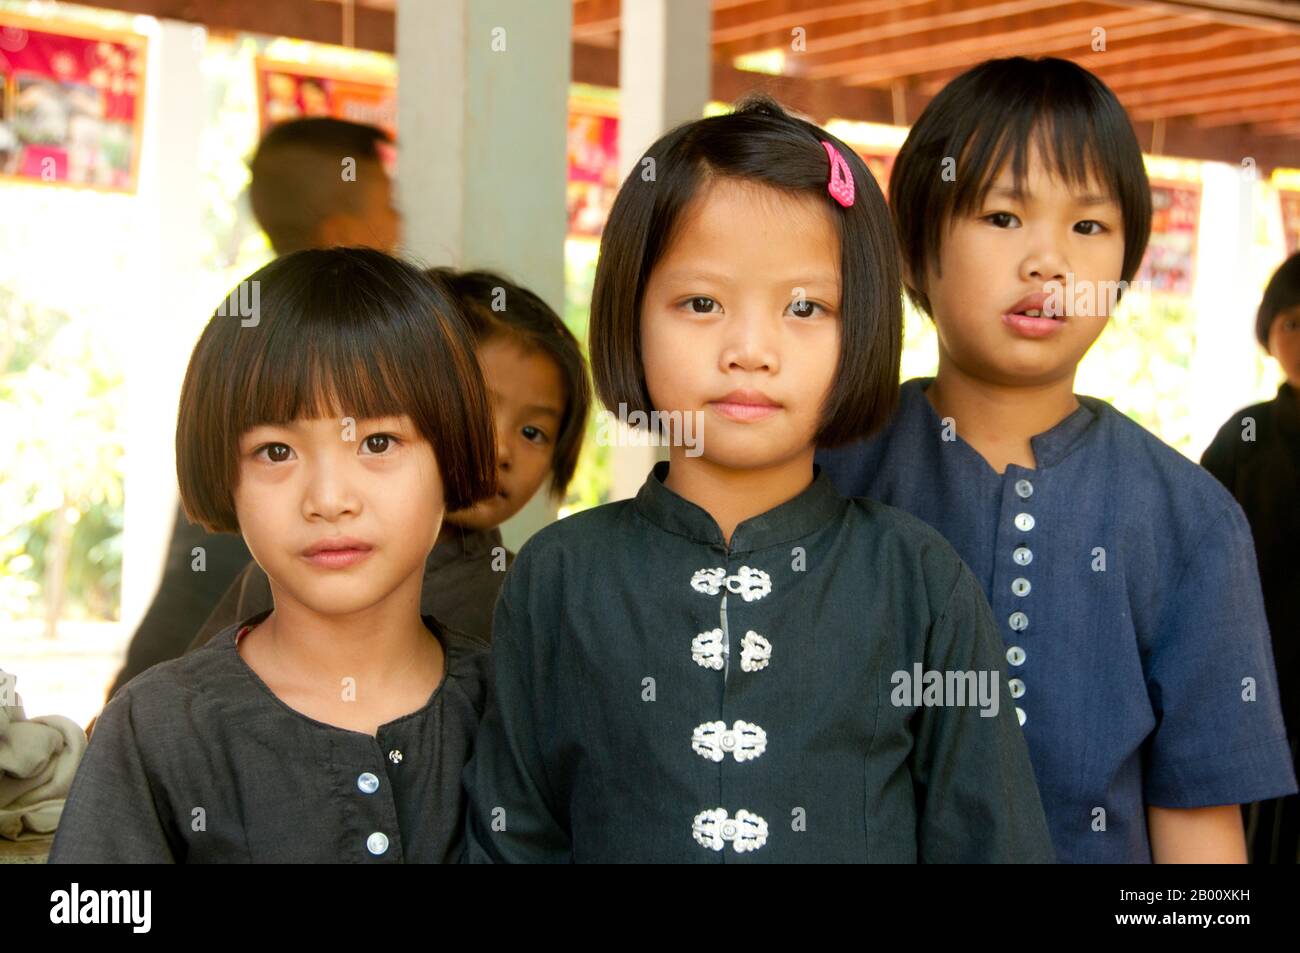 Thailand: Schoolchildren at the local school still wear Tai Dam traditional clothing to school, Ban Na Pa Nat Tai Dam Cultural Village, Loei Province.  The Tai Dam or Black Tai are an ethnic group found in parts of Laos, Vietnam, China, and Thailand.  Tai Dam speakers in China are classified as part of the Dai nationality along with almost all the other Tai peoples. But in Vietnam they are given their own nationality (with the White Tai) where they are classified as the Thái nationality (meaning Tai people).  The Tai Dam originate from the vicinity of Dien Bien Phu in Vietnam. Stock Photo